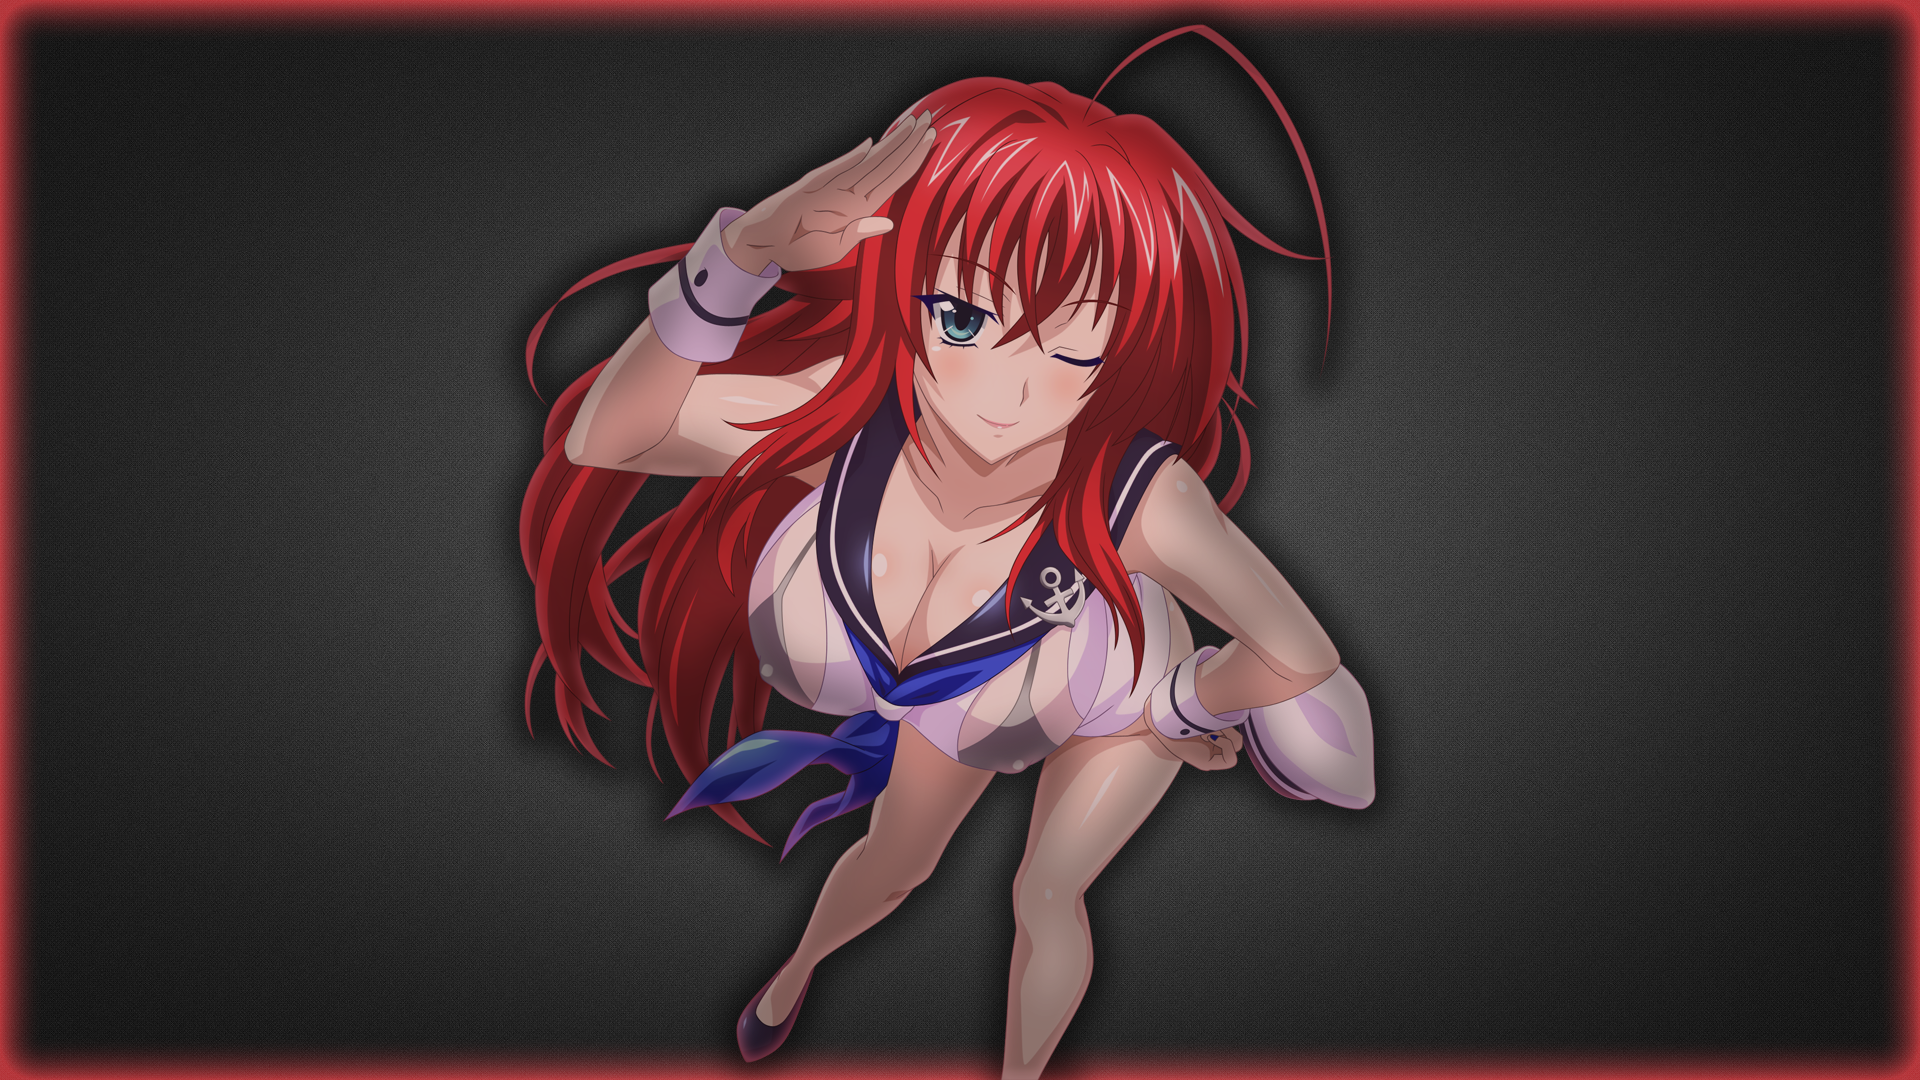 Anime 1920x1080 redhead wink Gremory Rias High School DxD see-through clothing bra blue eyes cleavage shoes anime anime girls sailor uniform